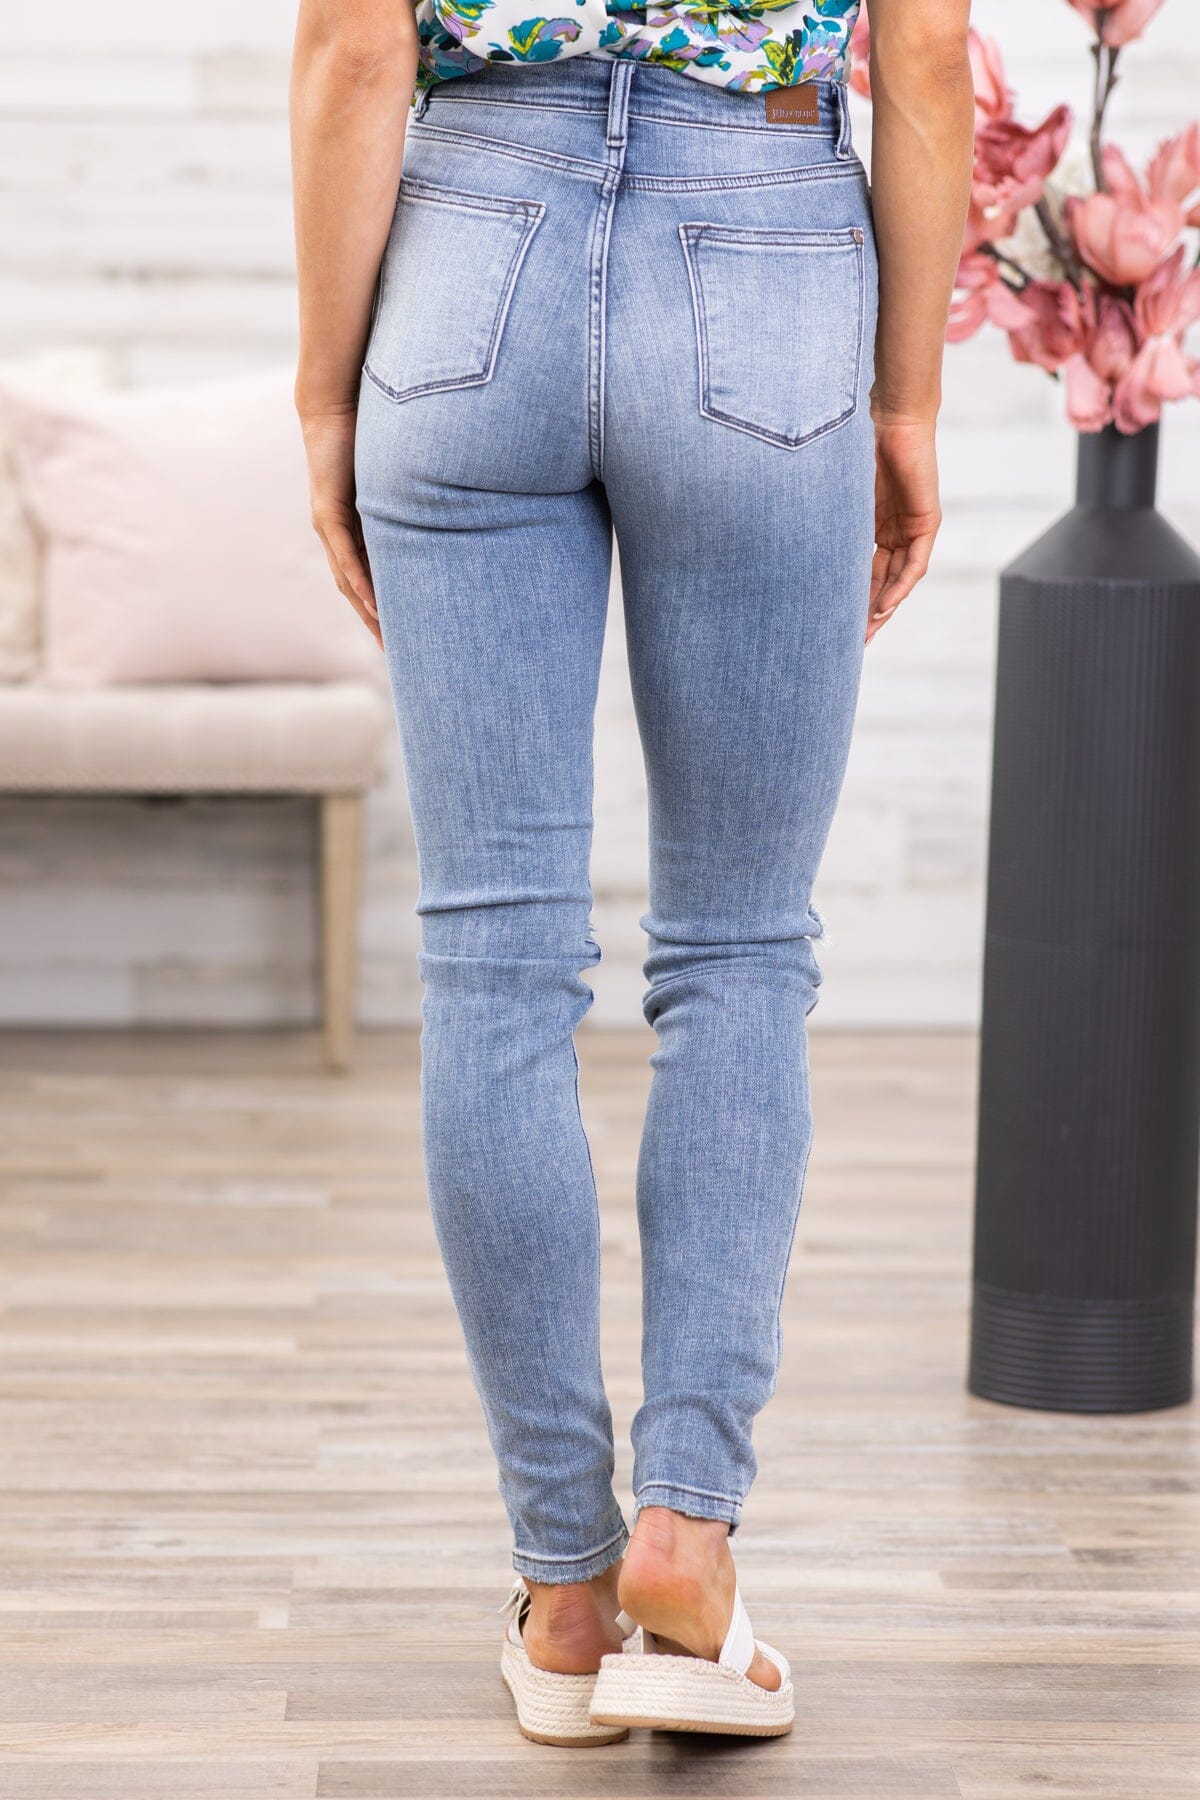 Judy Blue Long Inseam Distressed Jeans